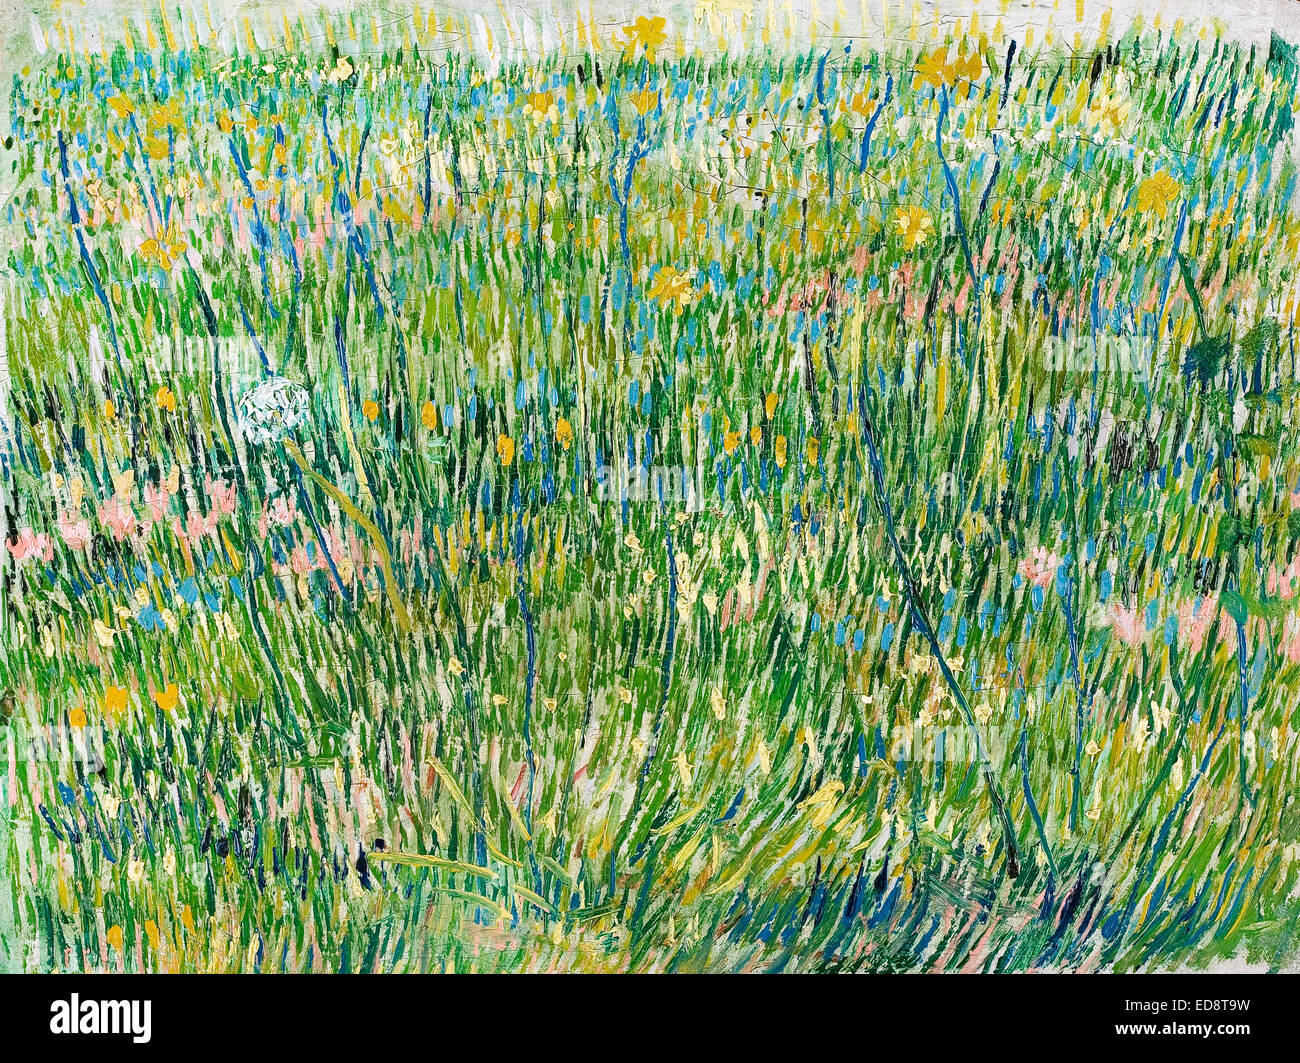 Vincent van Gogh, Patch of Grass 1887 Oil on canvas. Kroller-Muller Museum, Otterlo, Netherlands. Stock Photo